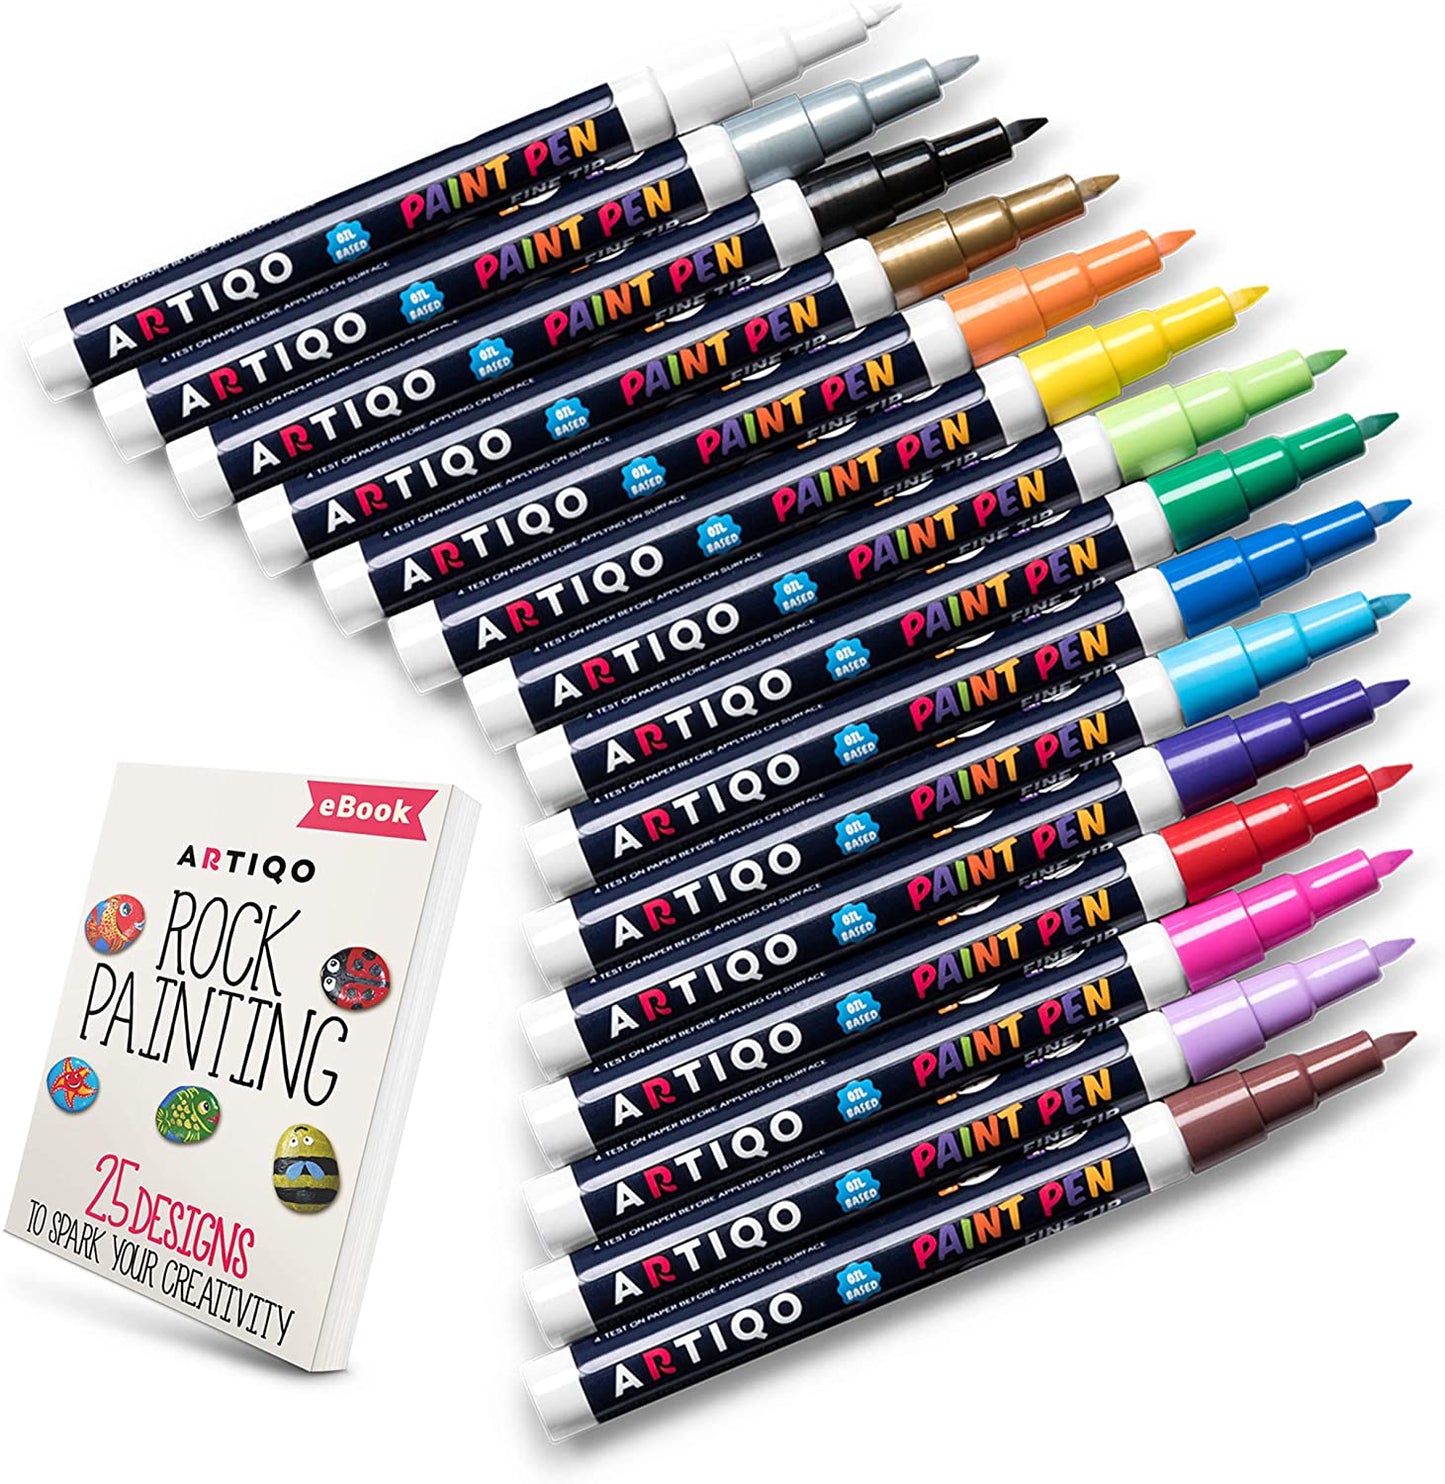 Fine Tip Paint pens for Rock Painting - Wood, Glass, Metal and Ceramic Works on Almost All Surfaces Set of 15 Vibrant oil based fine point paint markers, Quick Dry, Water Resistant - (For 8 piece(s))